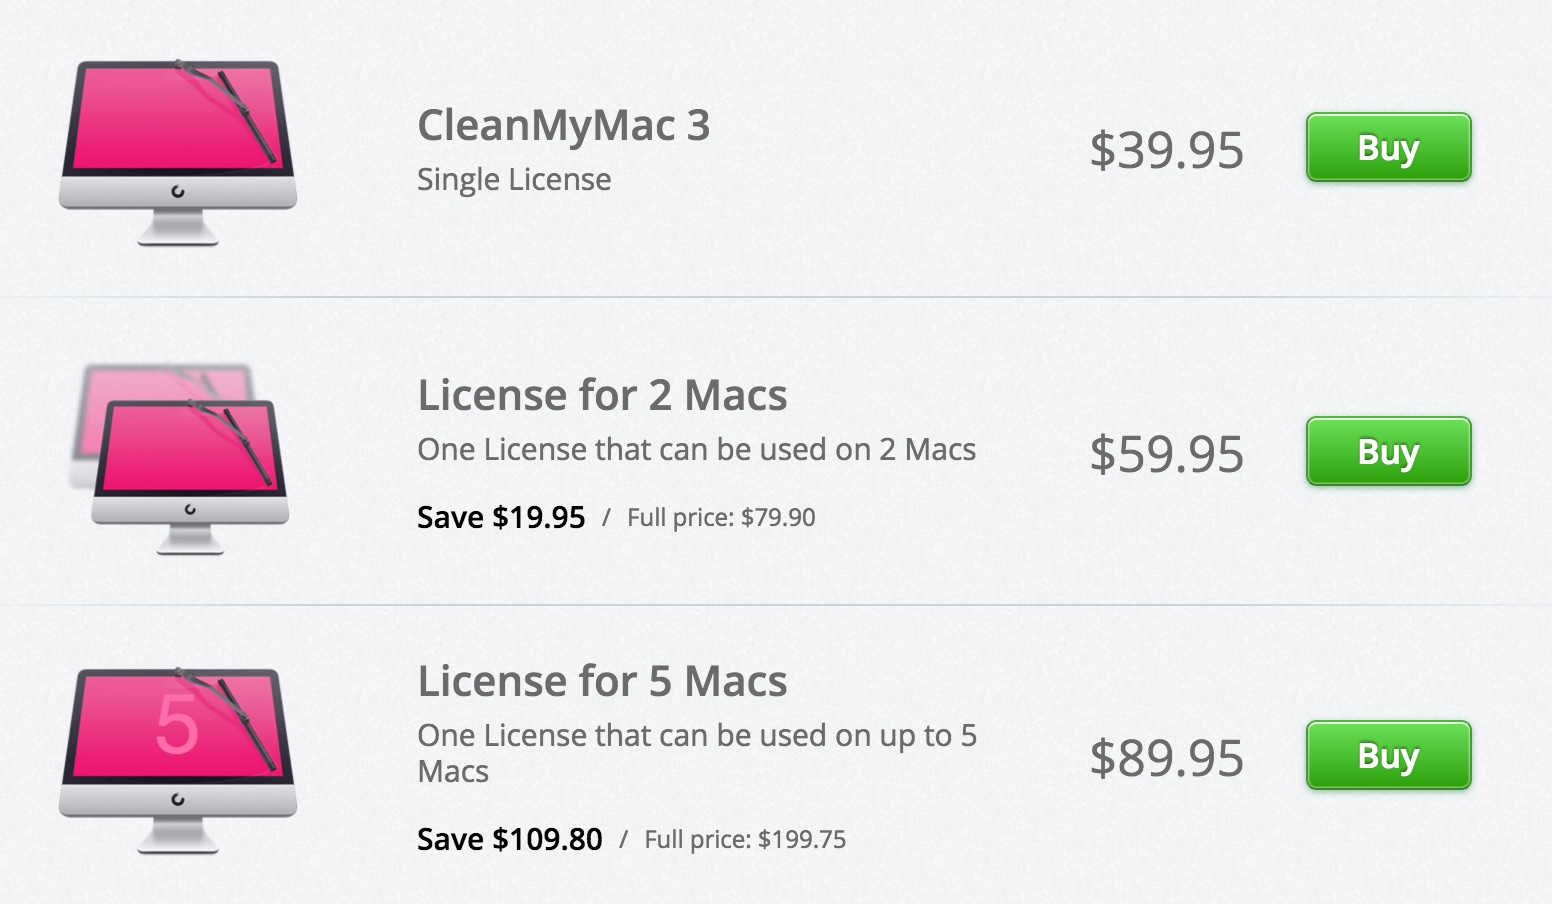 cleanmymac 3 reviews